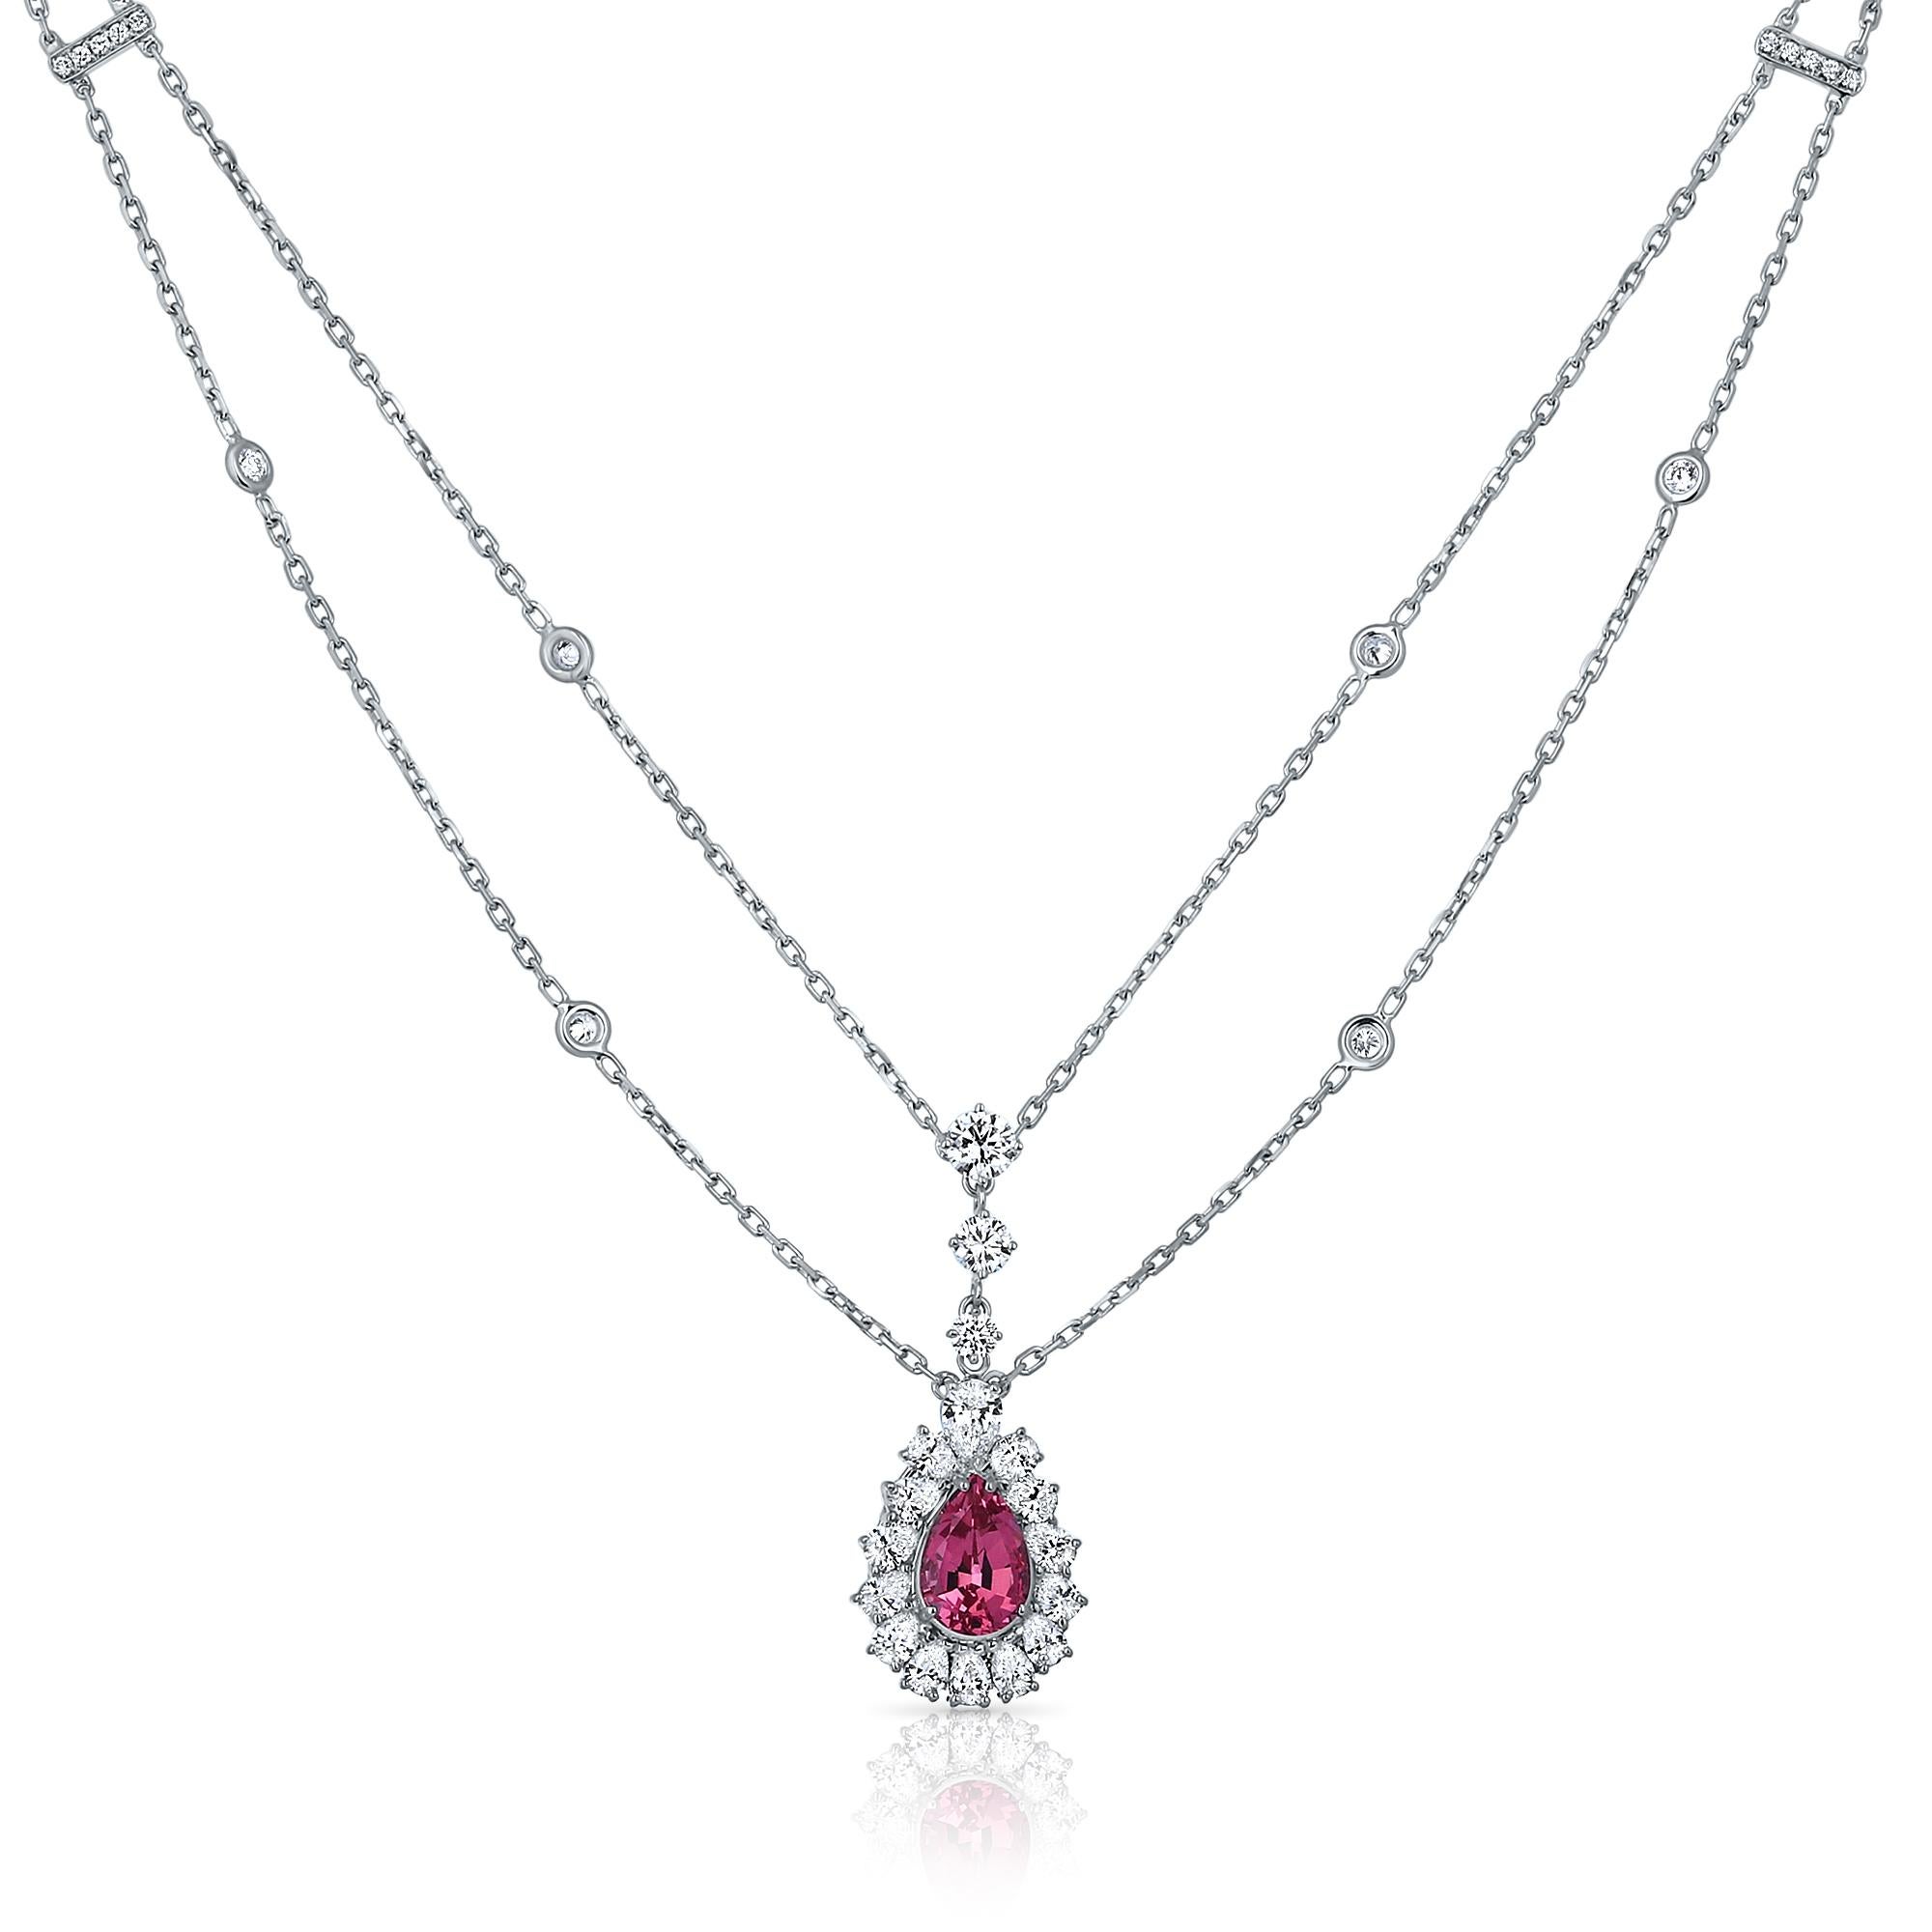 This fabulous antique style pendant is crafted from 18k white gold and features a rare pear-cut pink spinel gem stone at the center. The pink spinel adds extraordinary color and liveliness to this unique piece. You won't find anything quite like it!